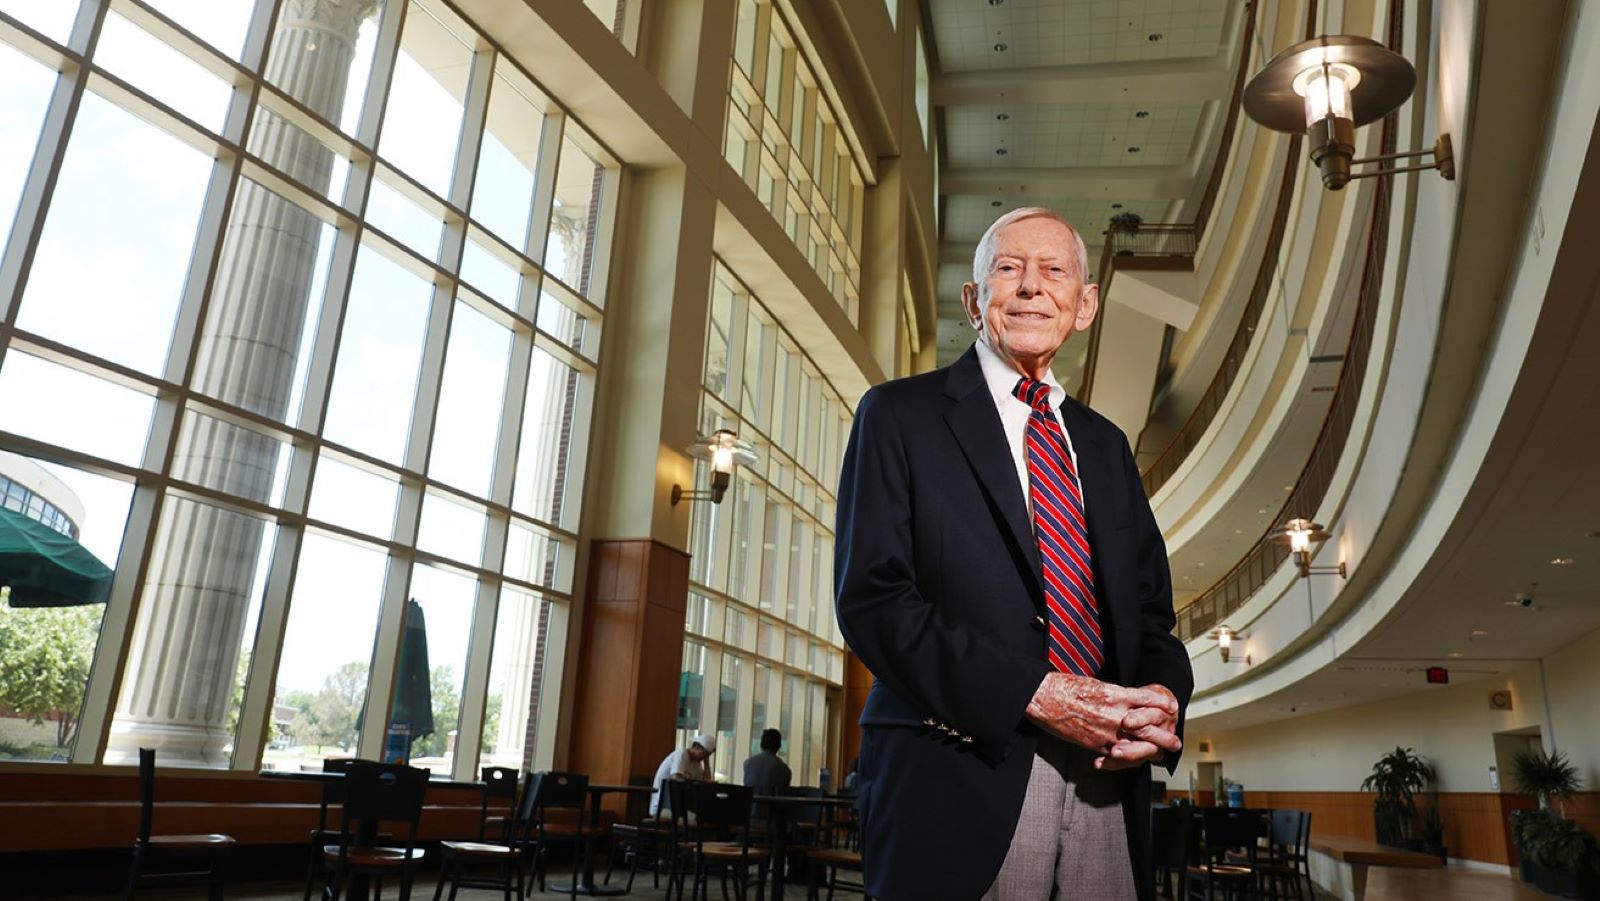 Dr. Roger E. Kirk in the atrium of the Baylor Sciences Building